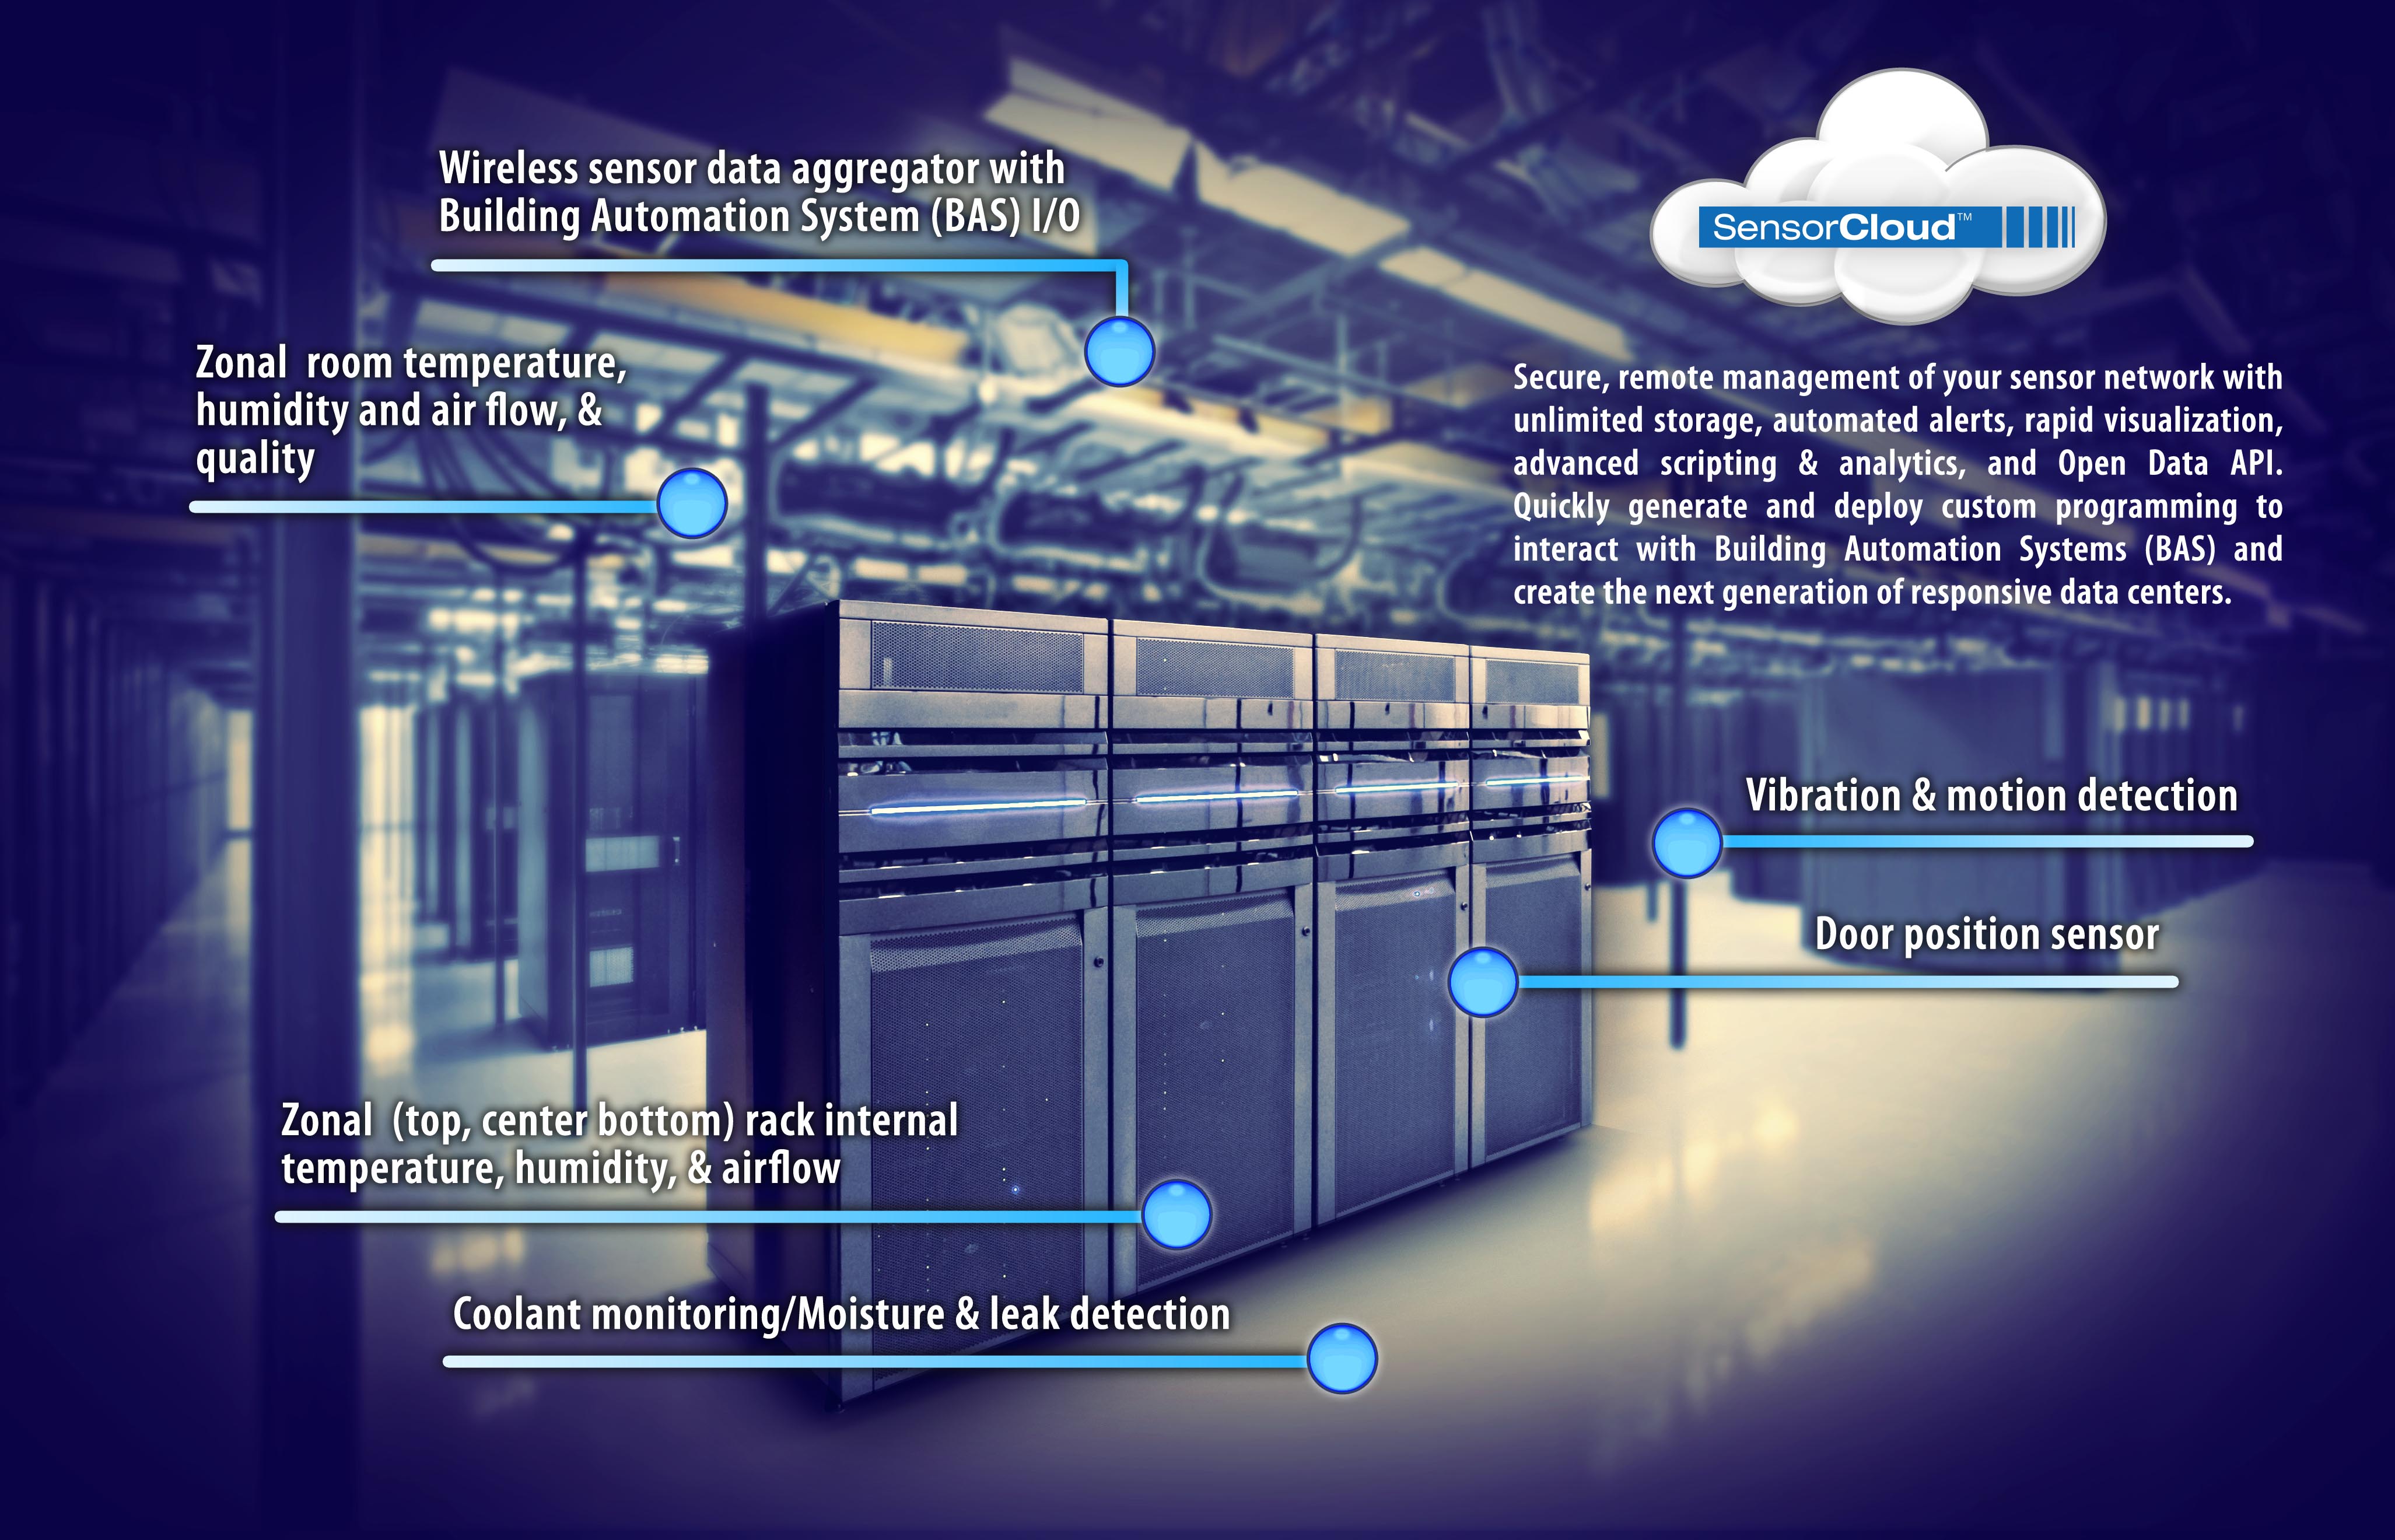 Monitoring of Data center and server rooms